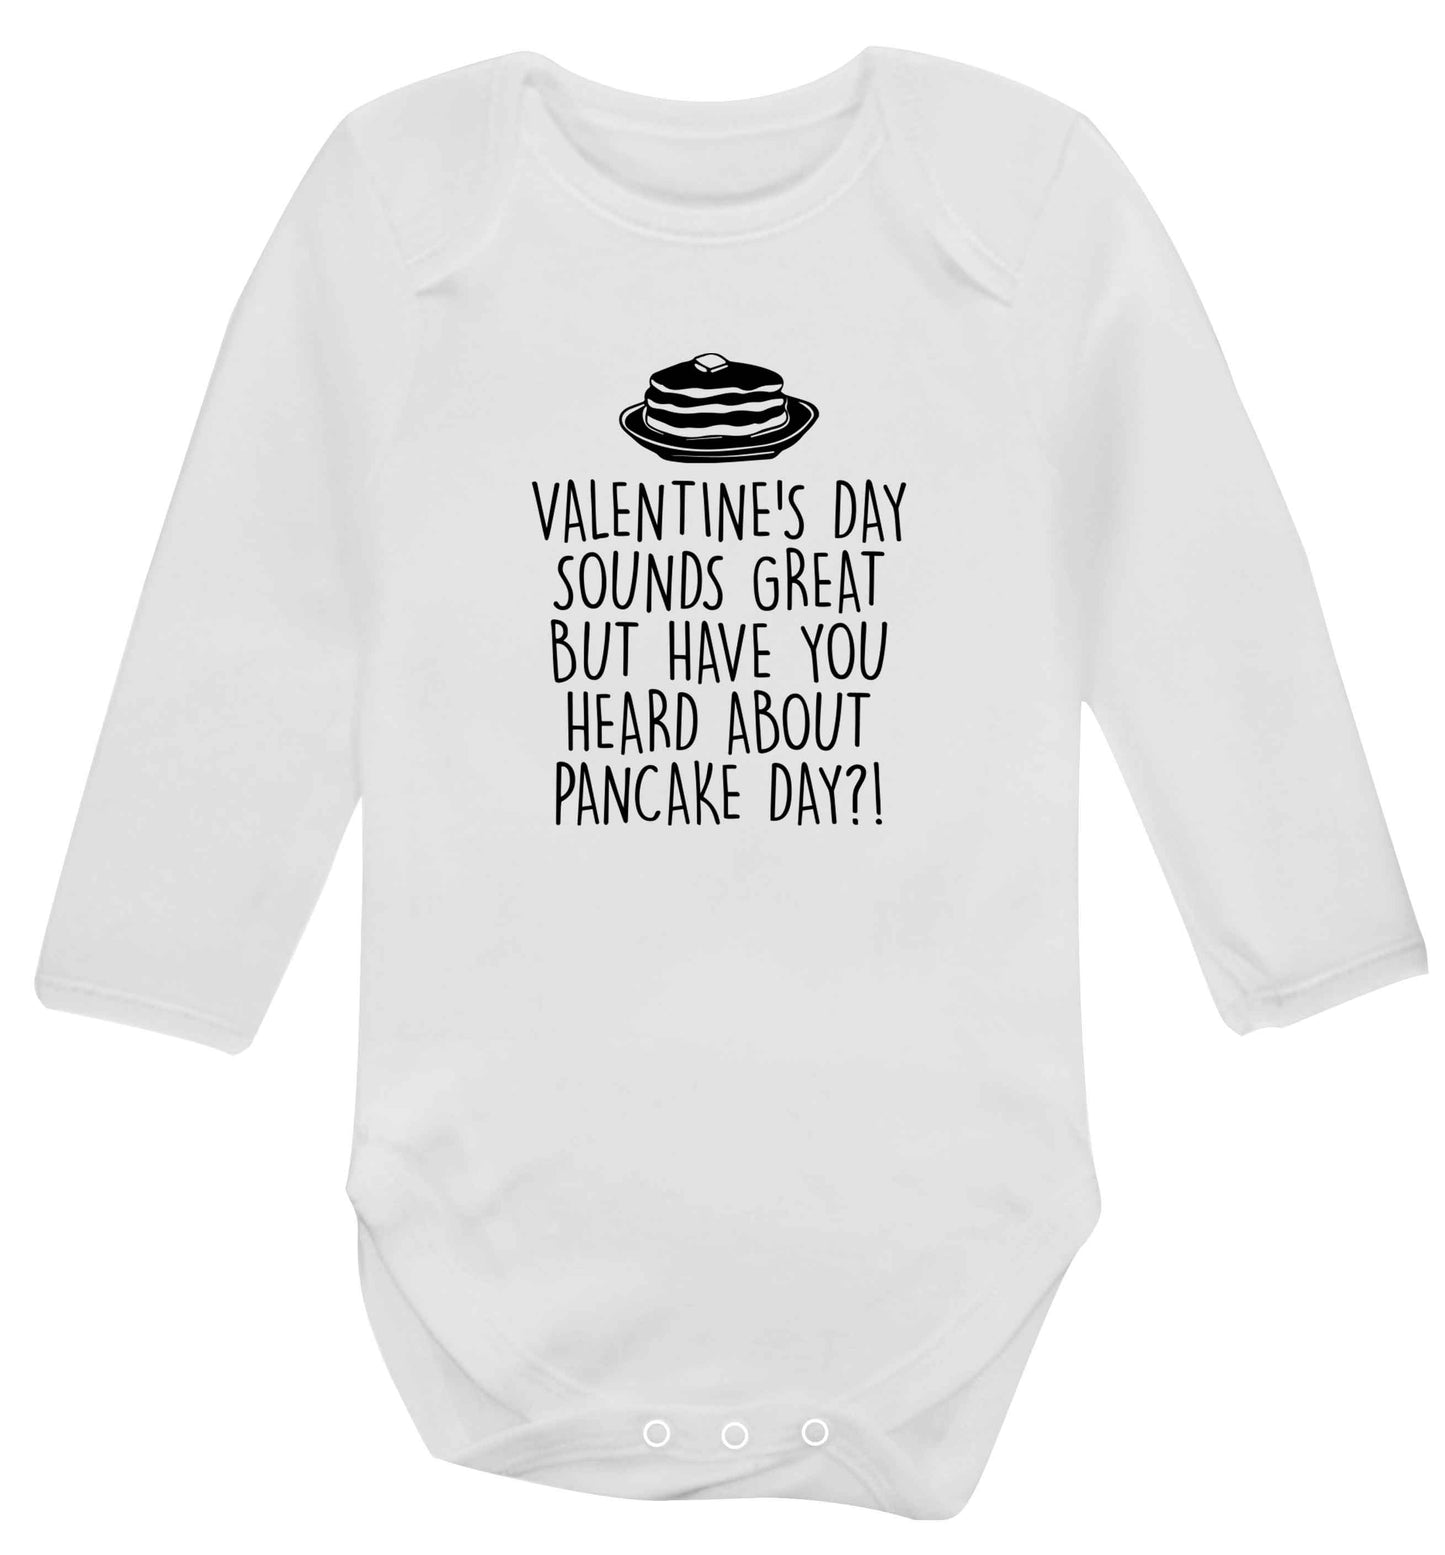 Valentine's day sounds great but have you heard about pancake day?! baby vest long sleeved white 6-12 months